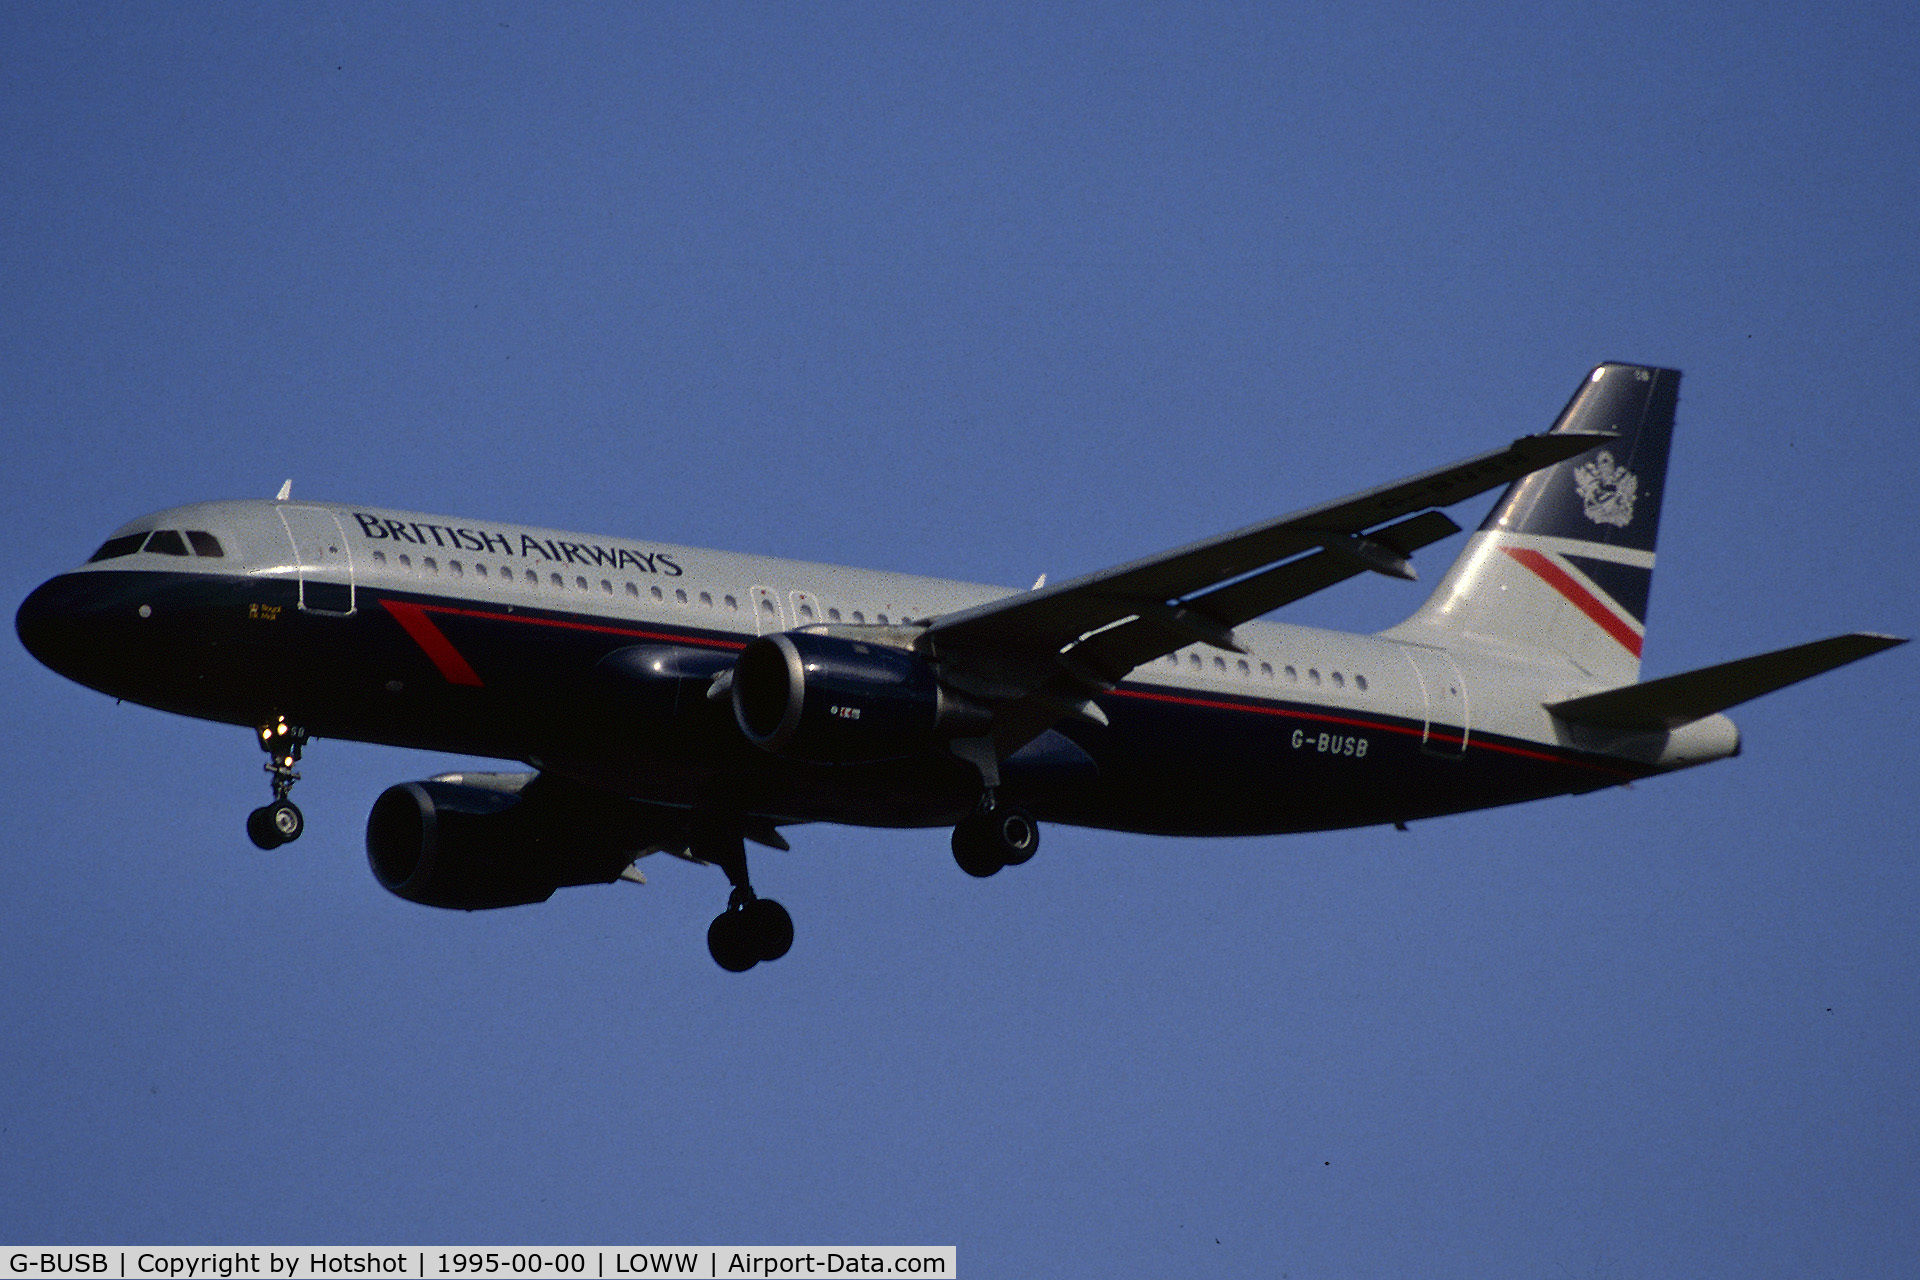 G-BUSB, 1987 Airbus A320-111 C/N 006, Without arrow winglets